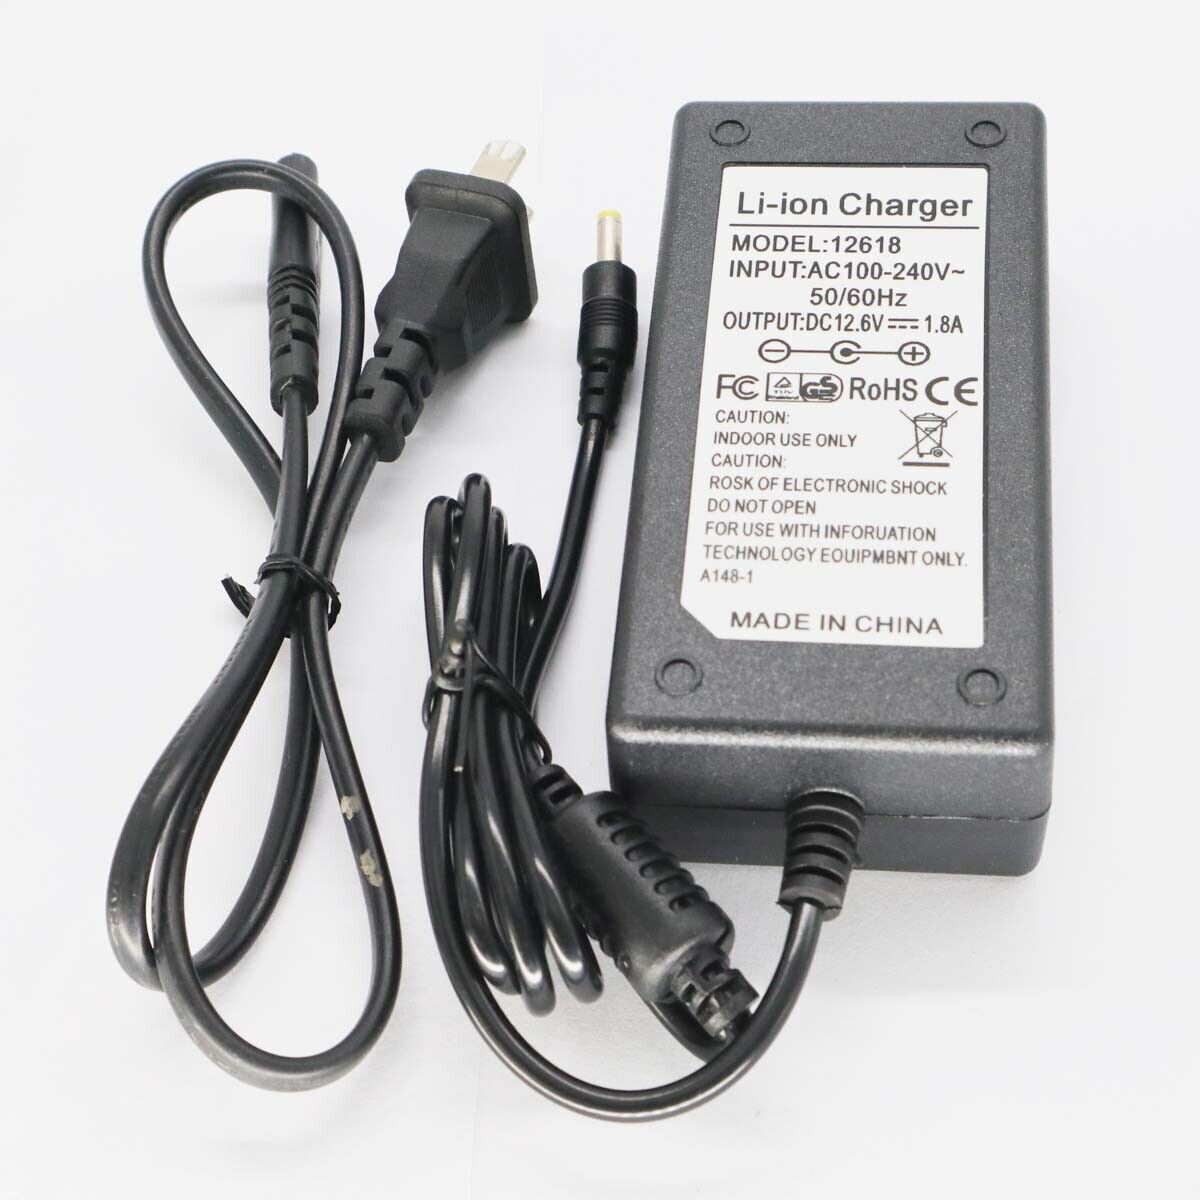 AC Adapter Charger for Korea INNO IFS15M IFS-15T IFS-15M+ Fiber Fusion Splicer Brand Unbranded Type AC/Standard Color B